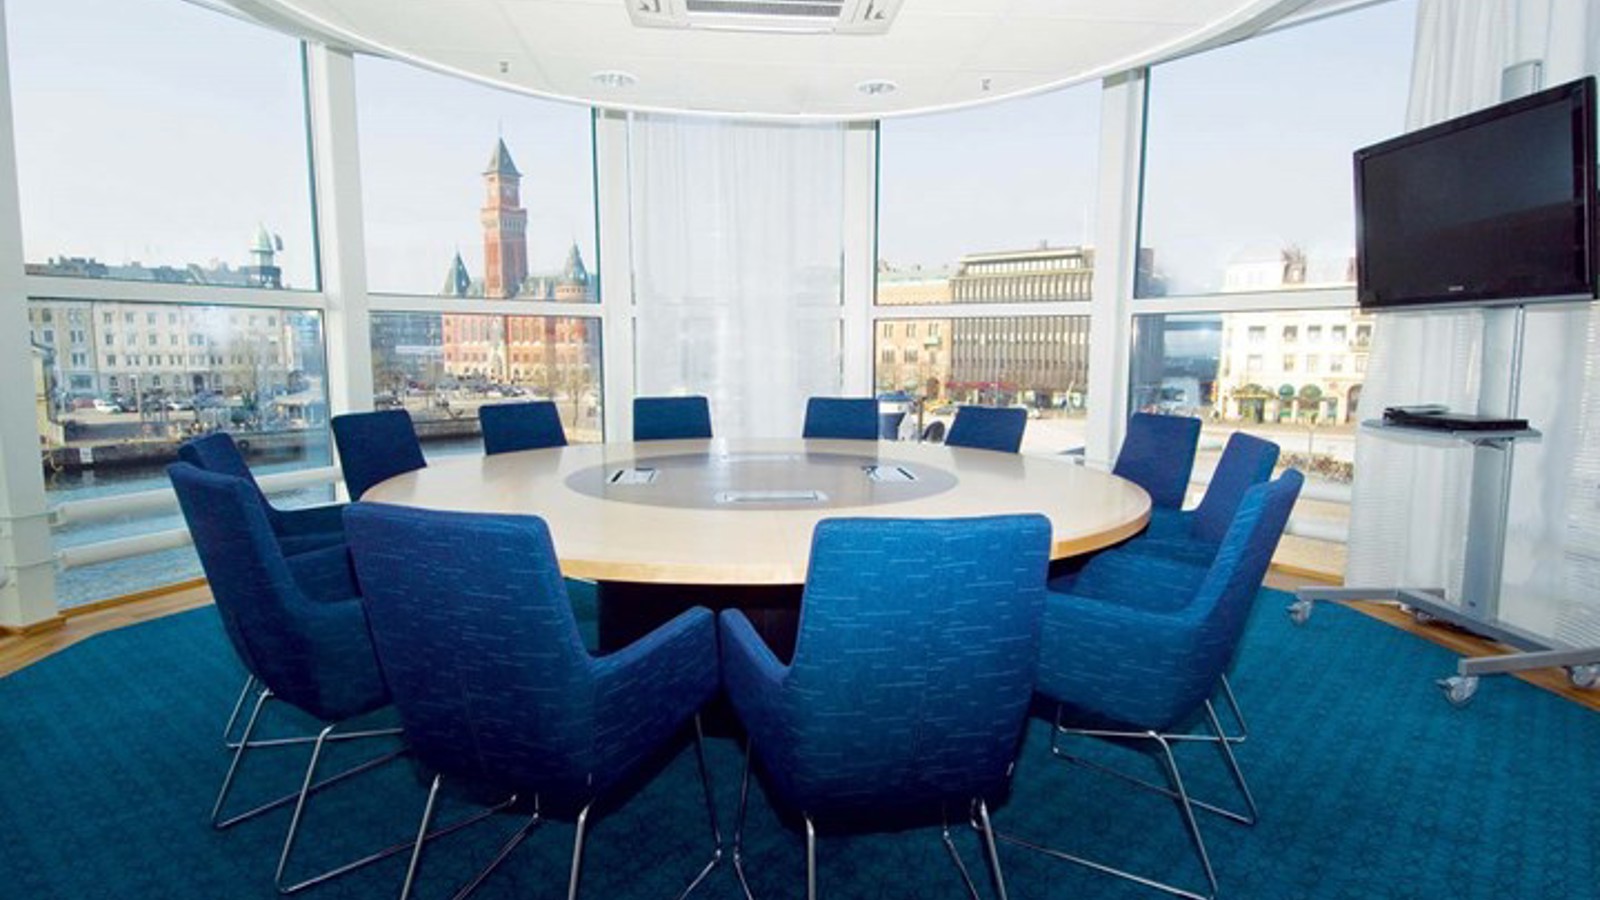 Conference room with round table, blue armchairs, blue carpet and large windows with a view